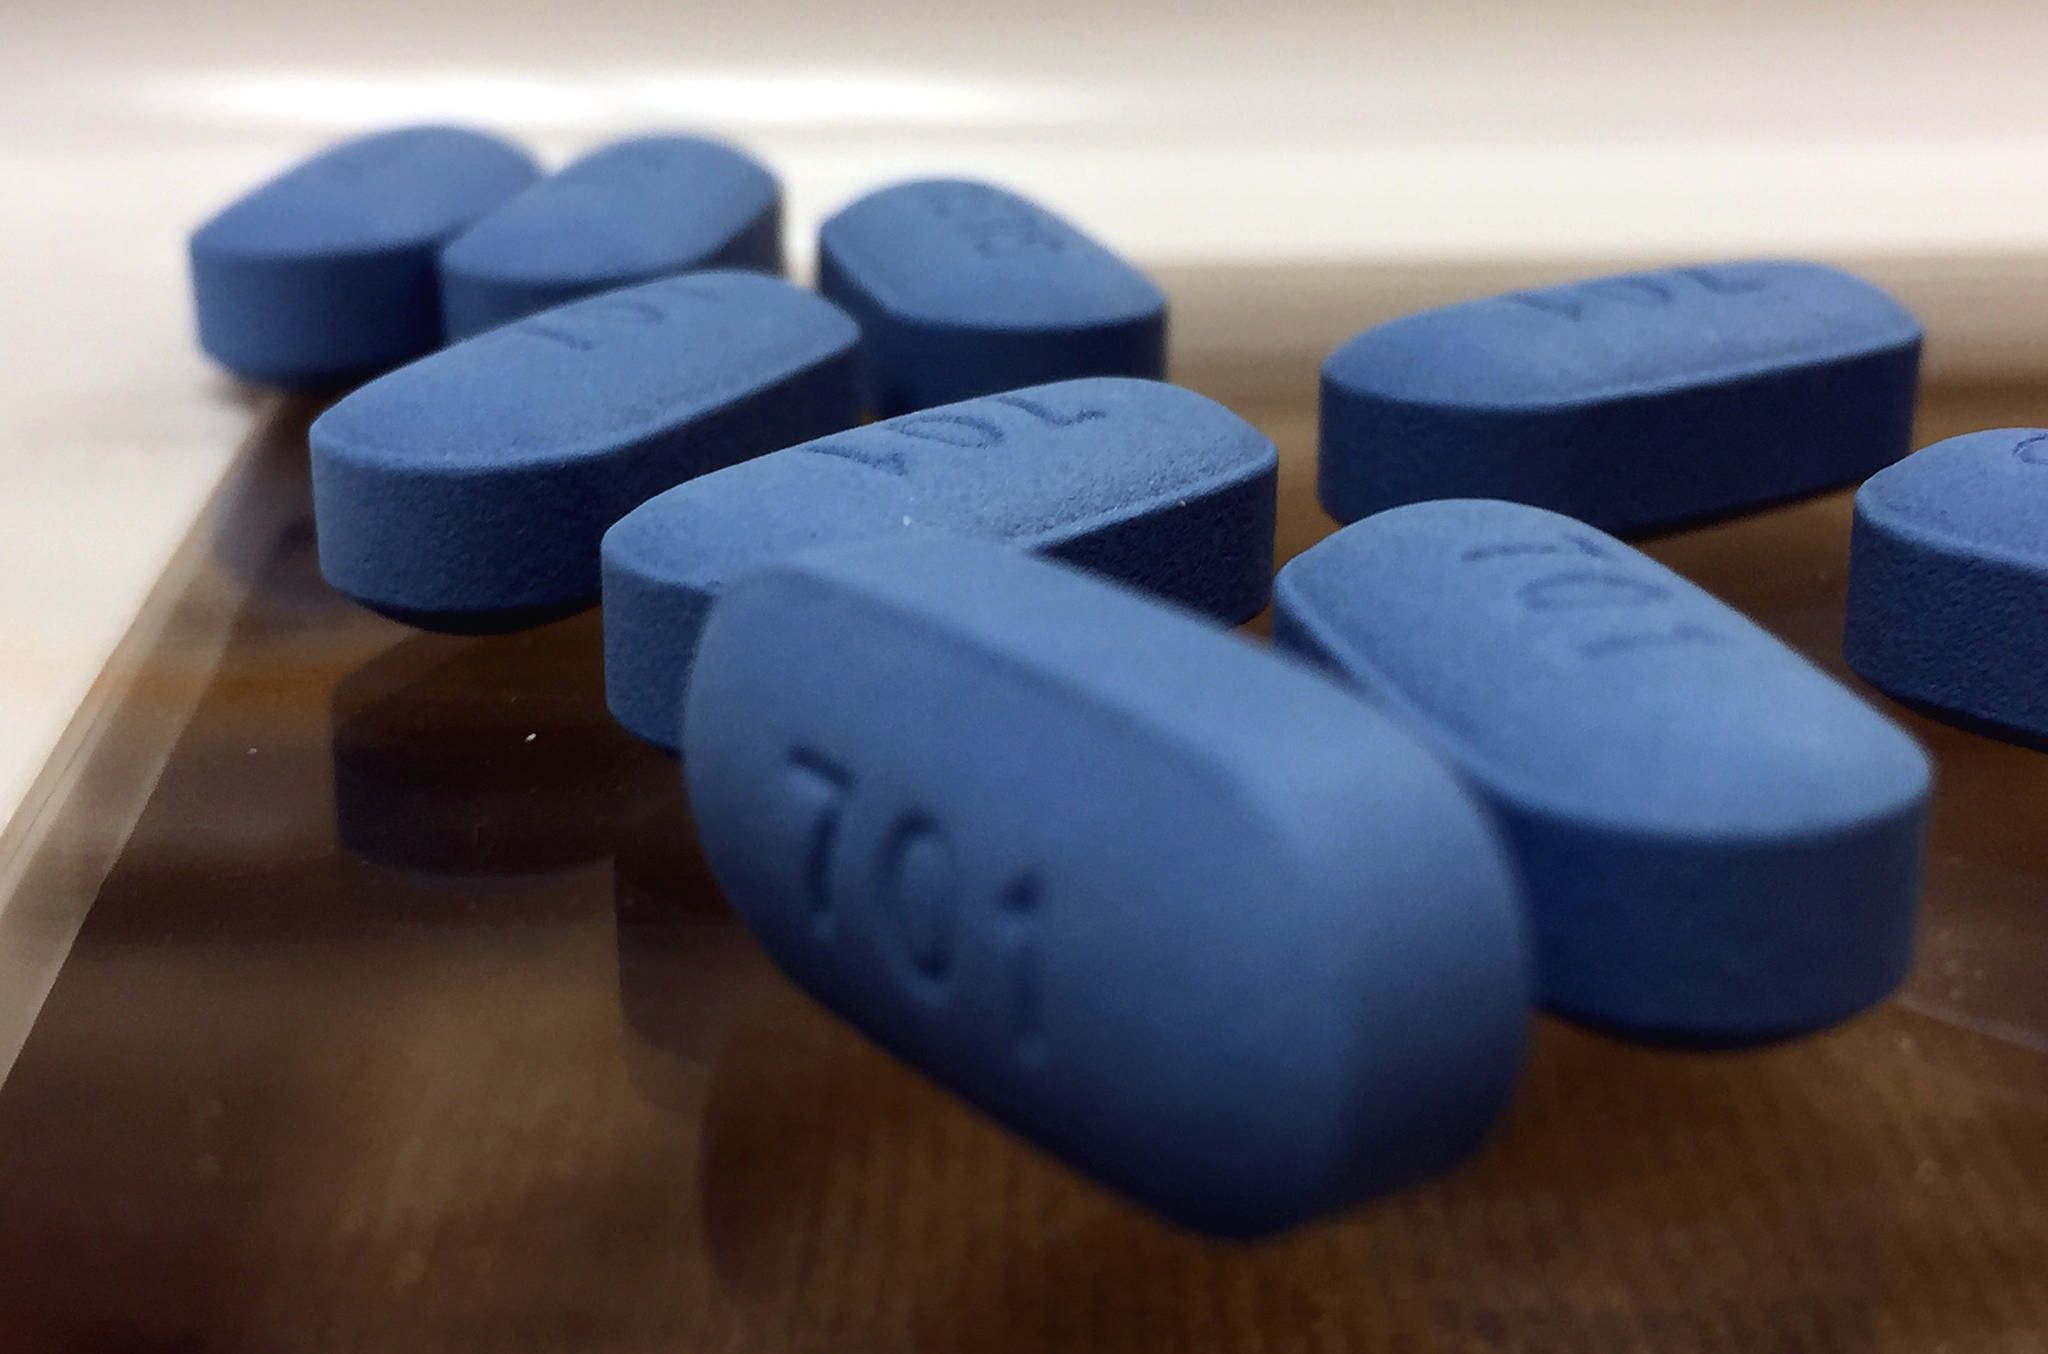 Science, Tech and Health News in Brief: Is the new HIV pill worth the cost?